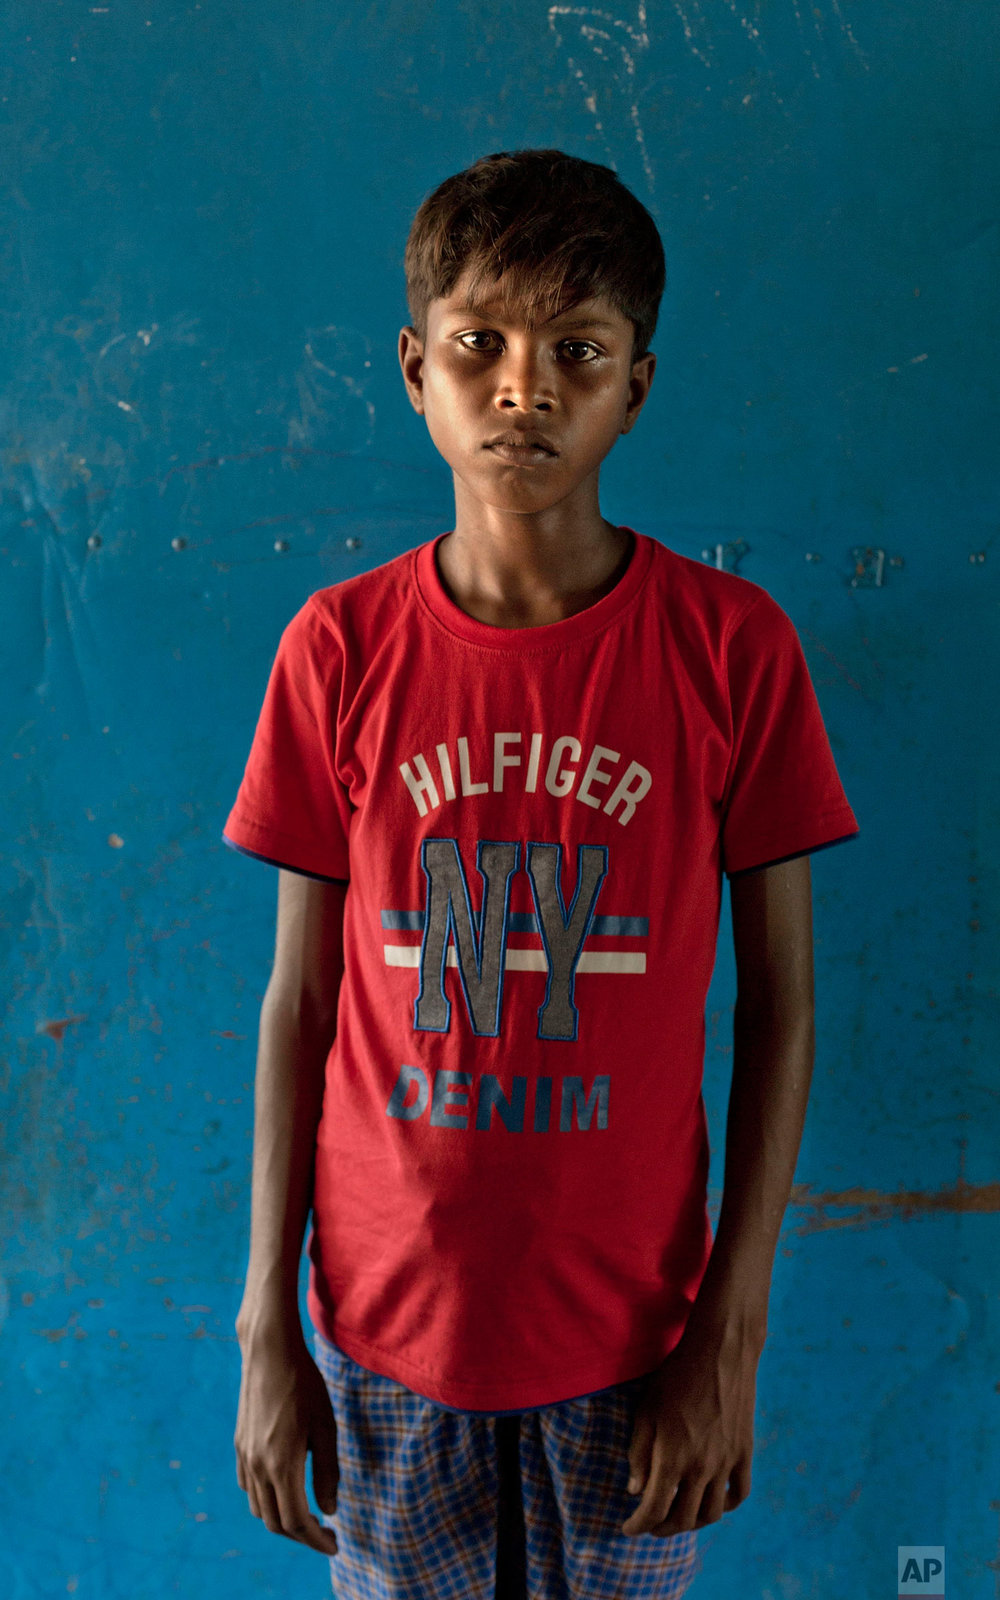  In this Oct. 1, 2017, photo, a Rohingya Muslim boy from Myanmar's Moidaung Village Abdul Gawfar, 13, poses for a photograph inside a transit shelter at Kutupalong camp for newly arrived Rohingya refugees in Bangladesh. His mother drowned when the bo